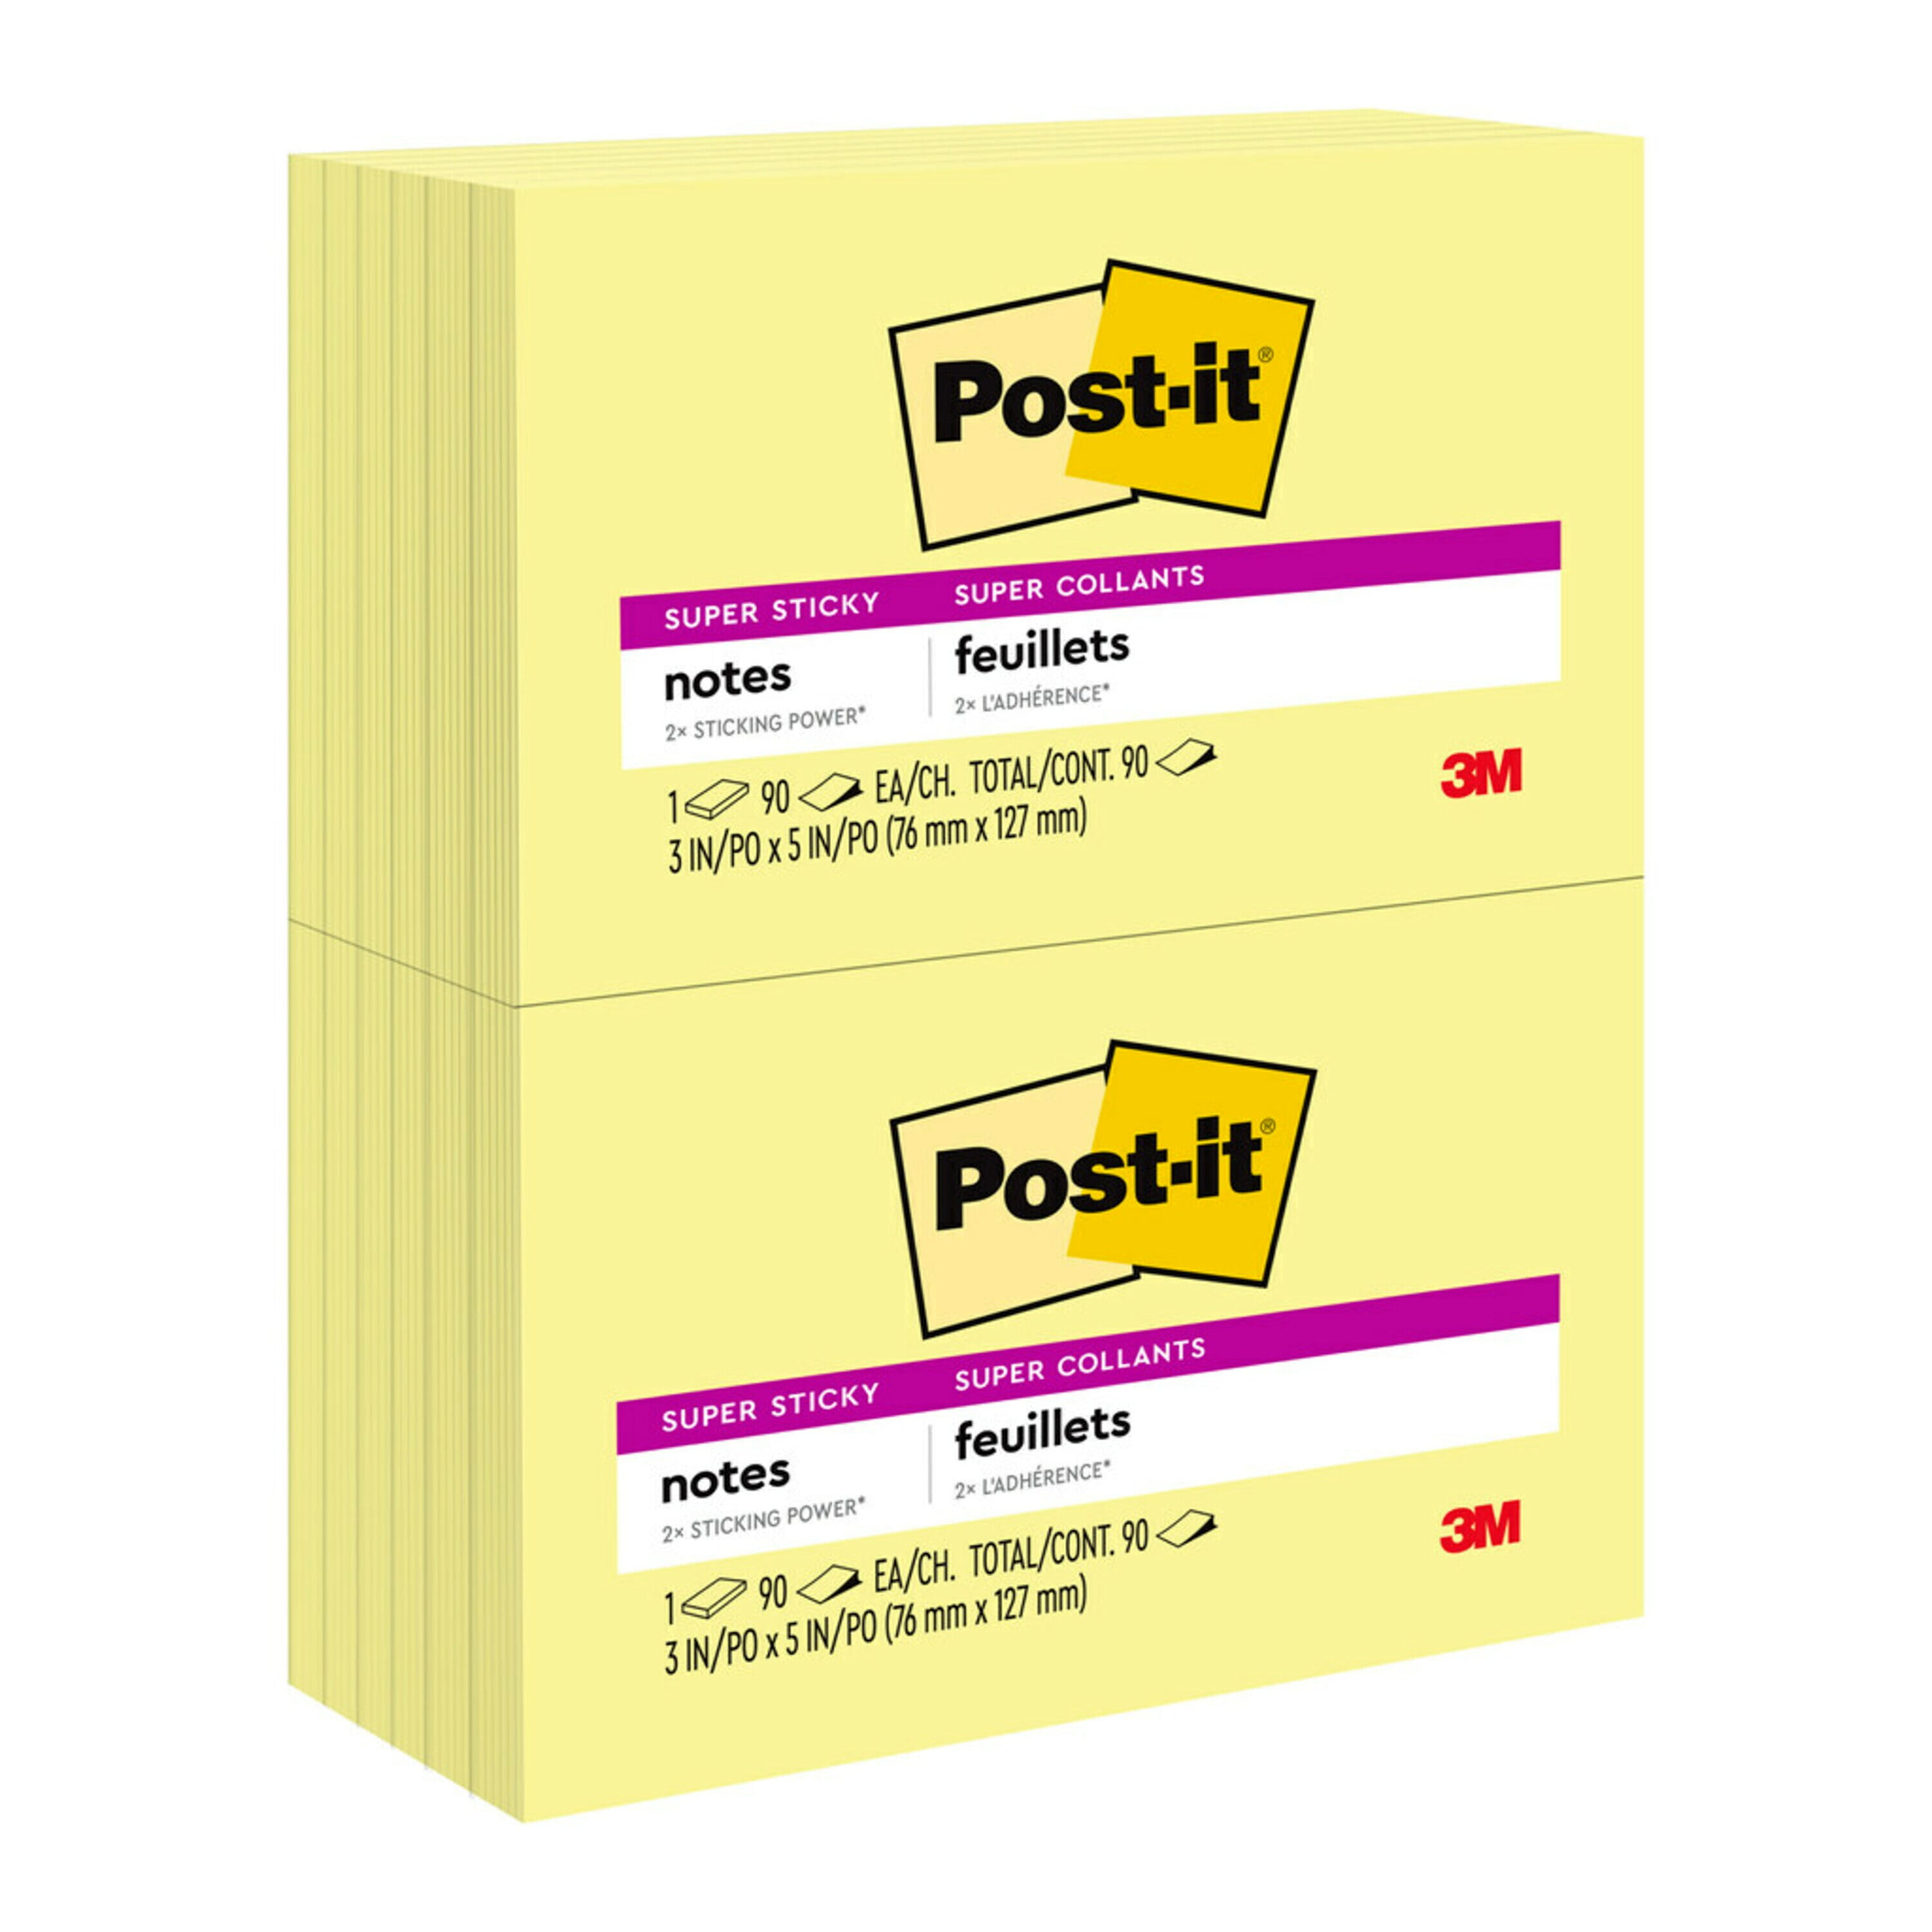 Post-it Lined Notepad, 4 x 6 in, Assorted Pastel Color, Pack of 5